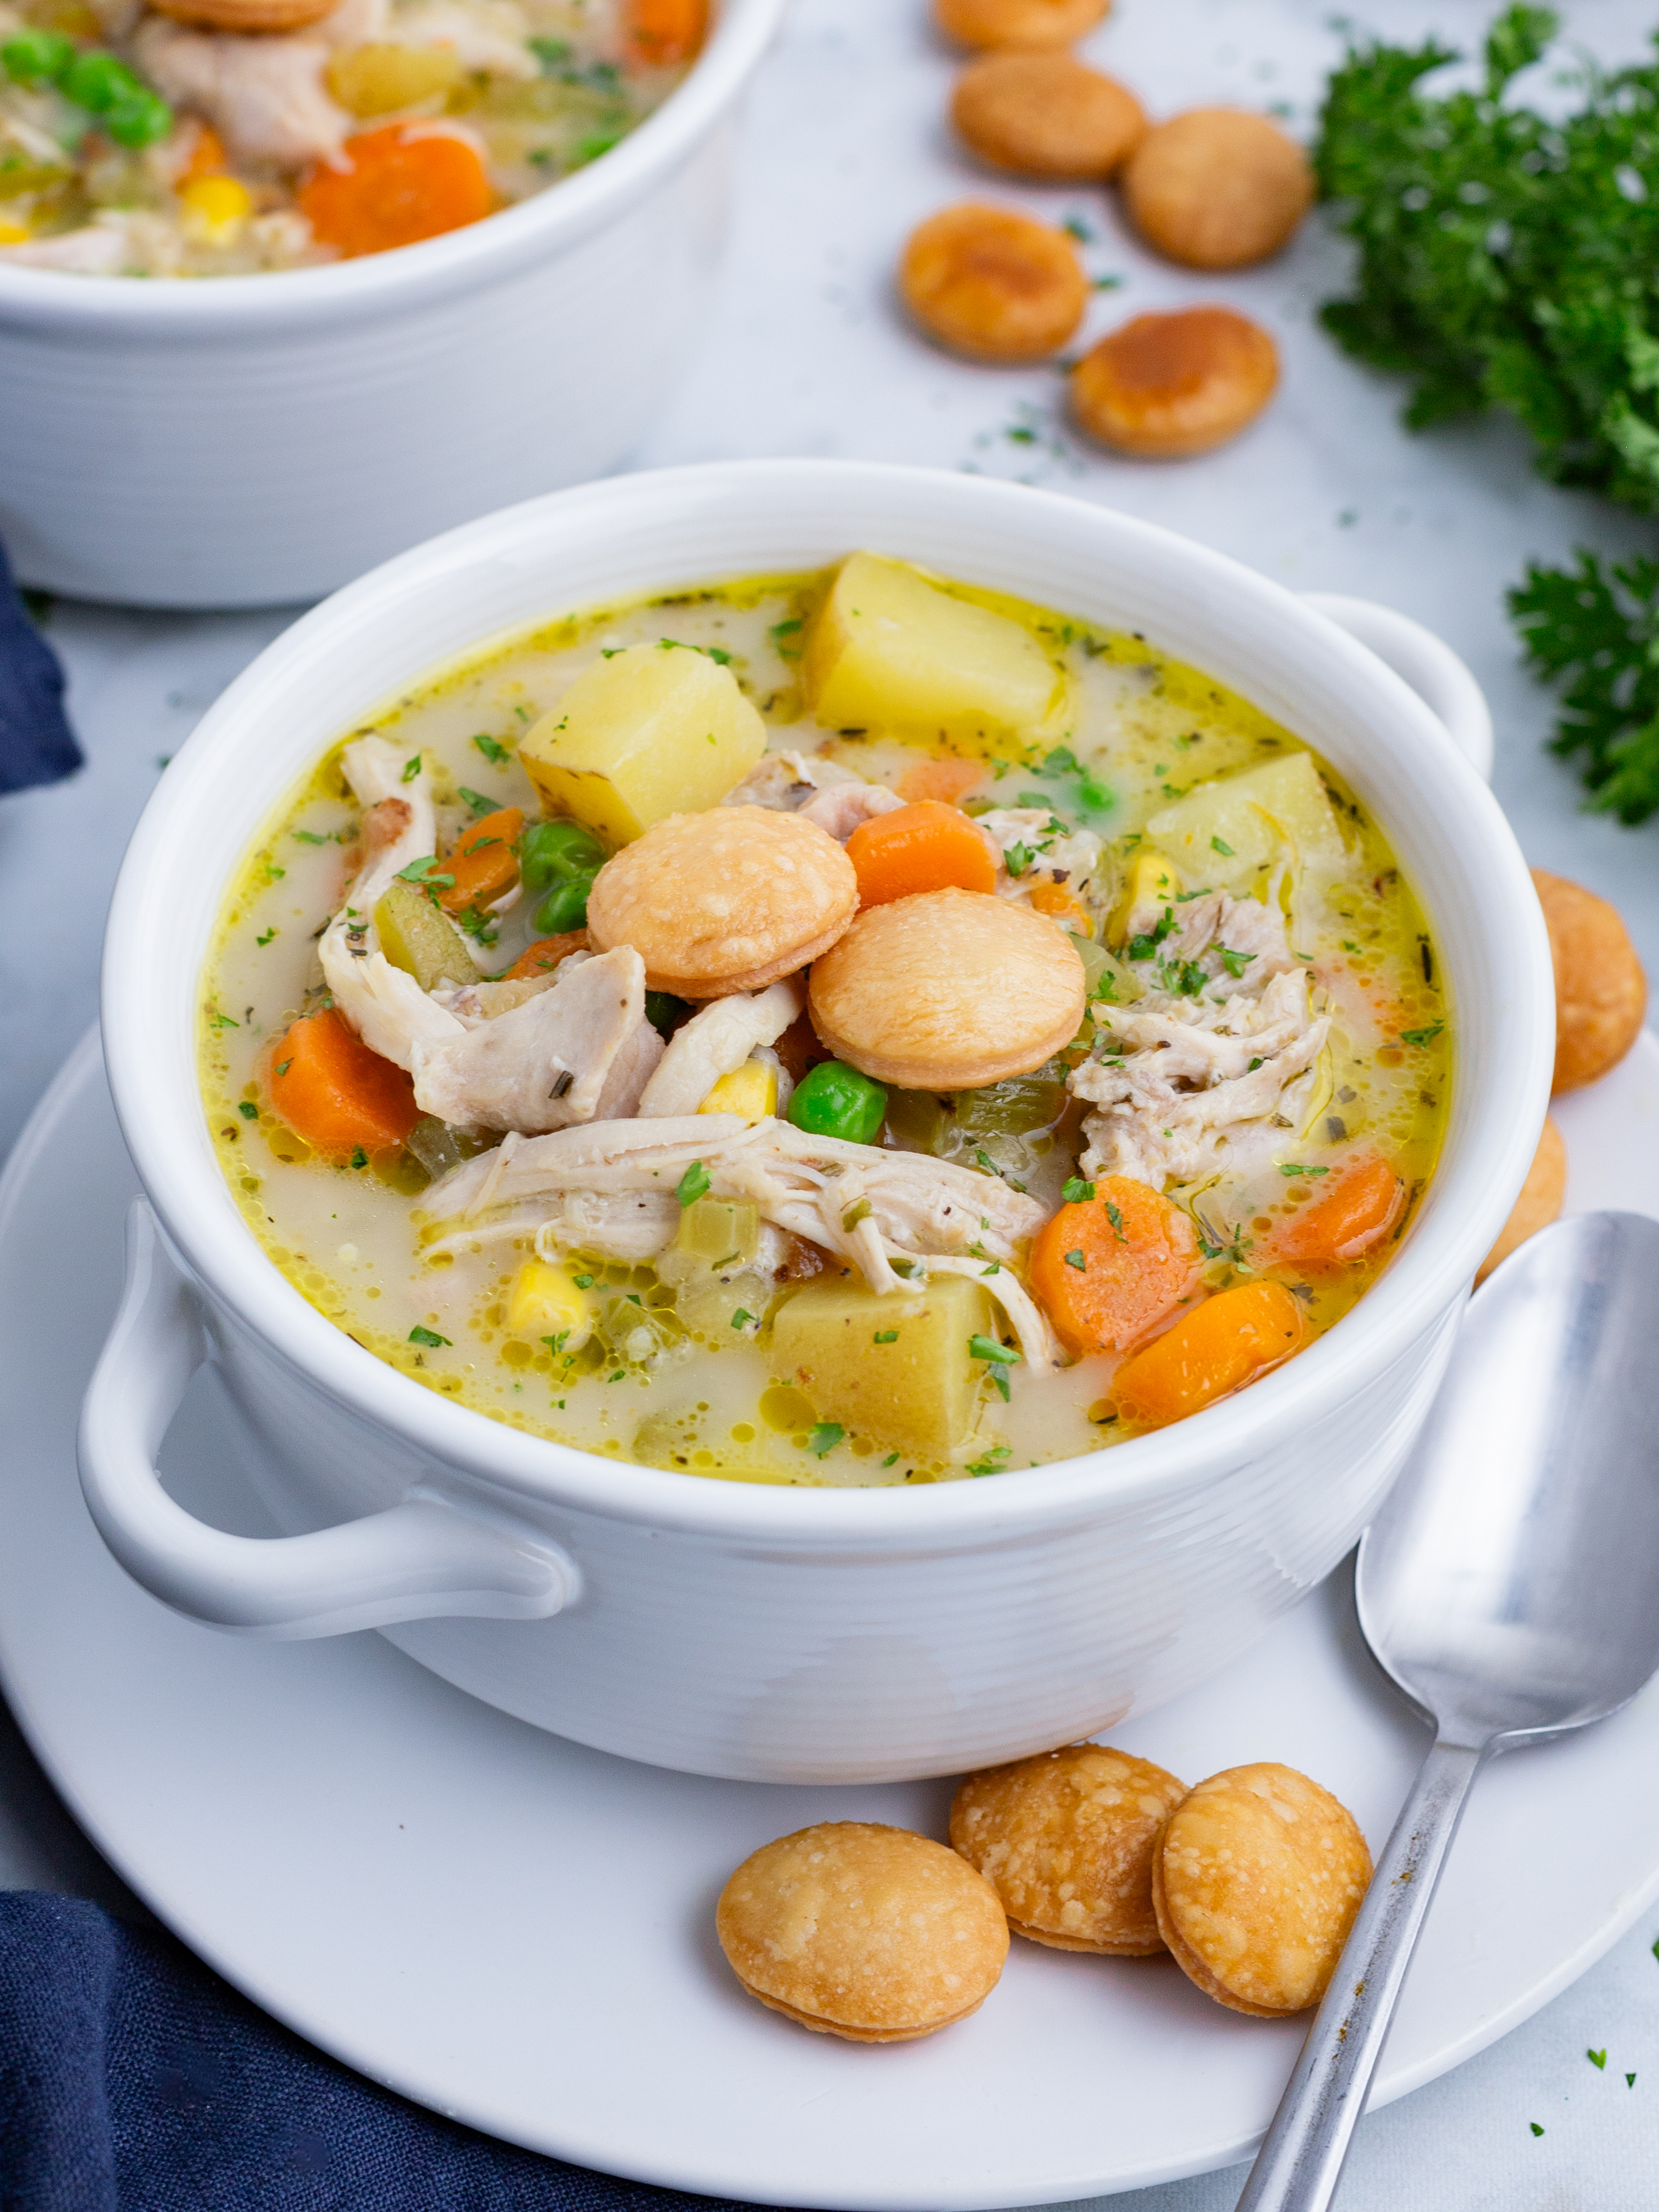 Chicken pot pie soup is served in a while bowl with pie crackers on the side.